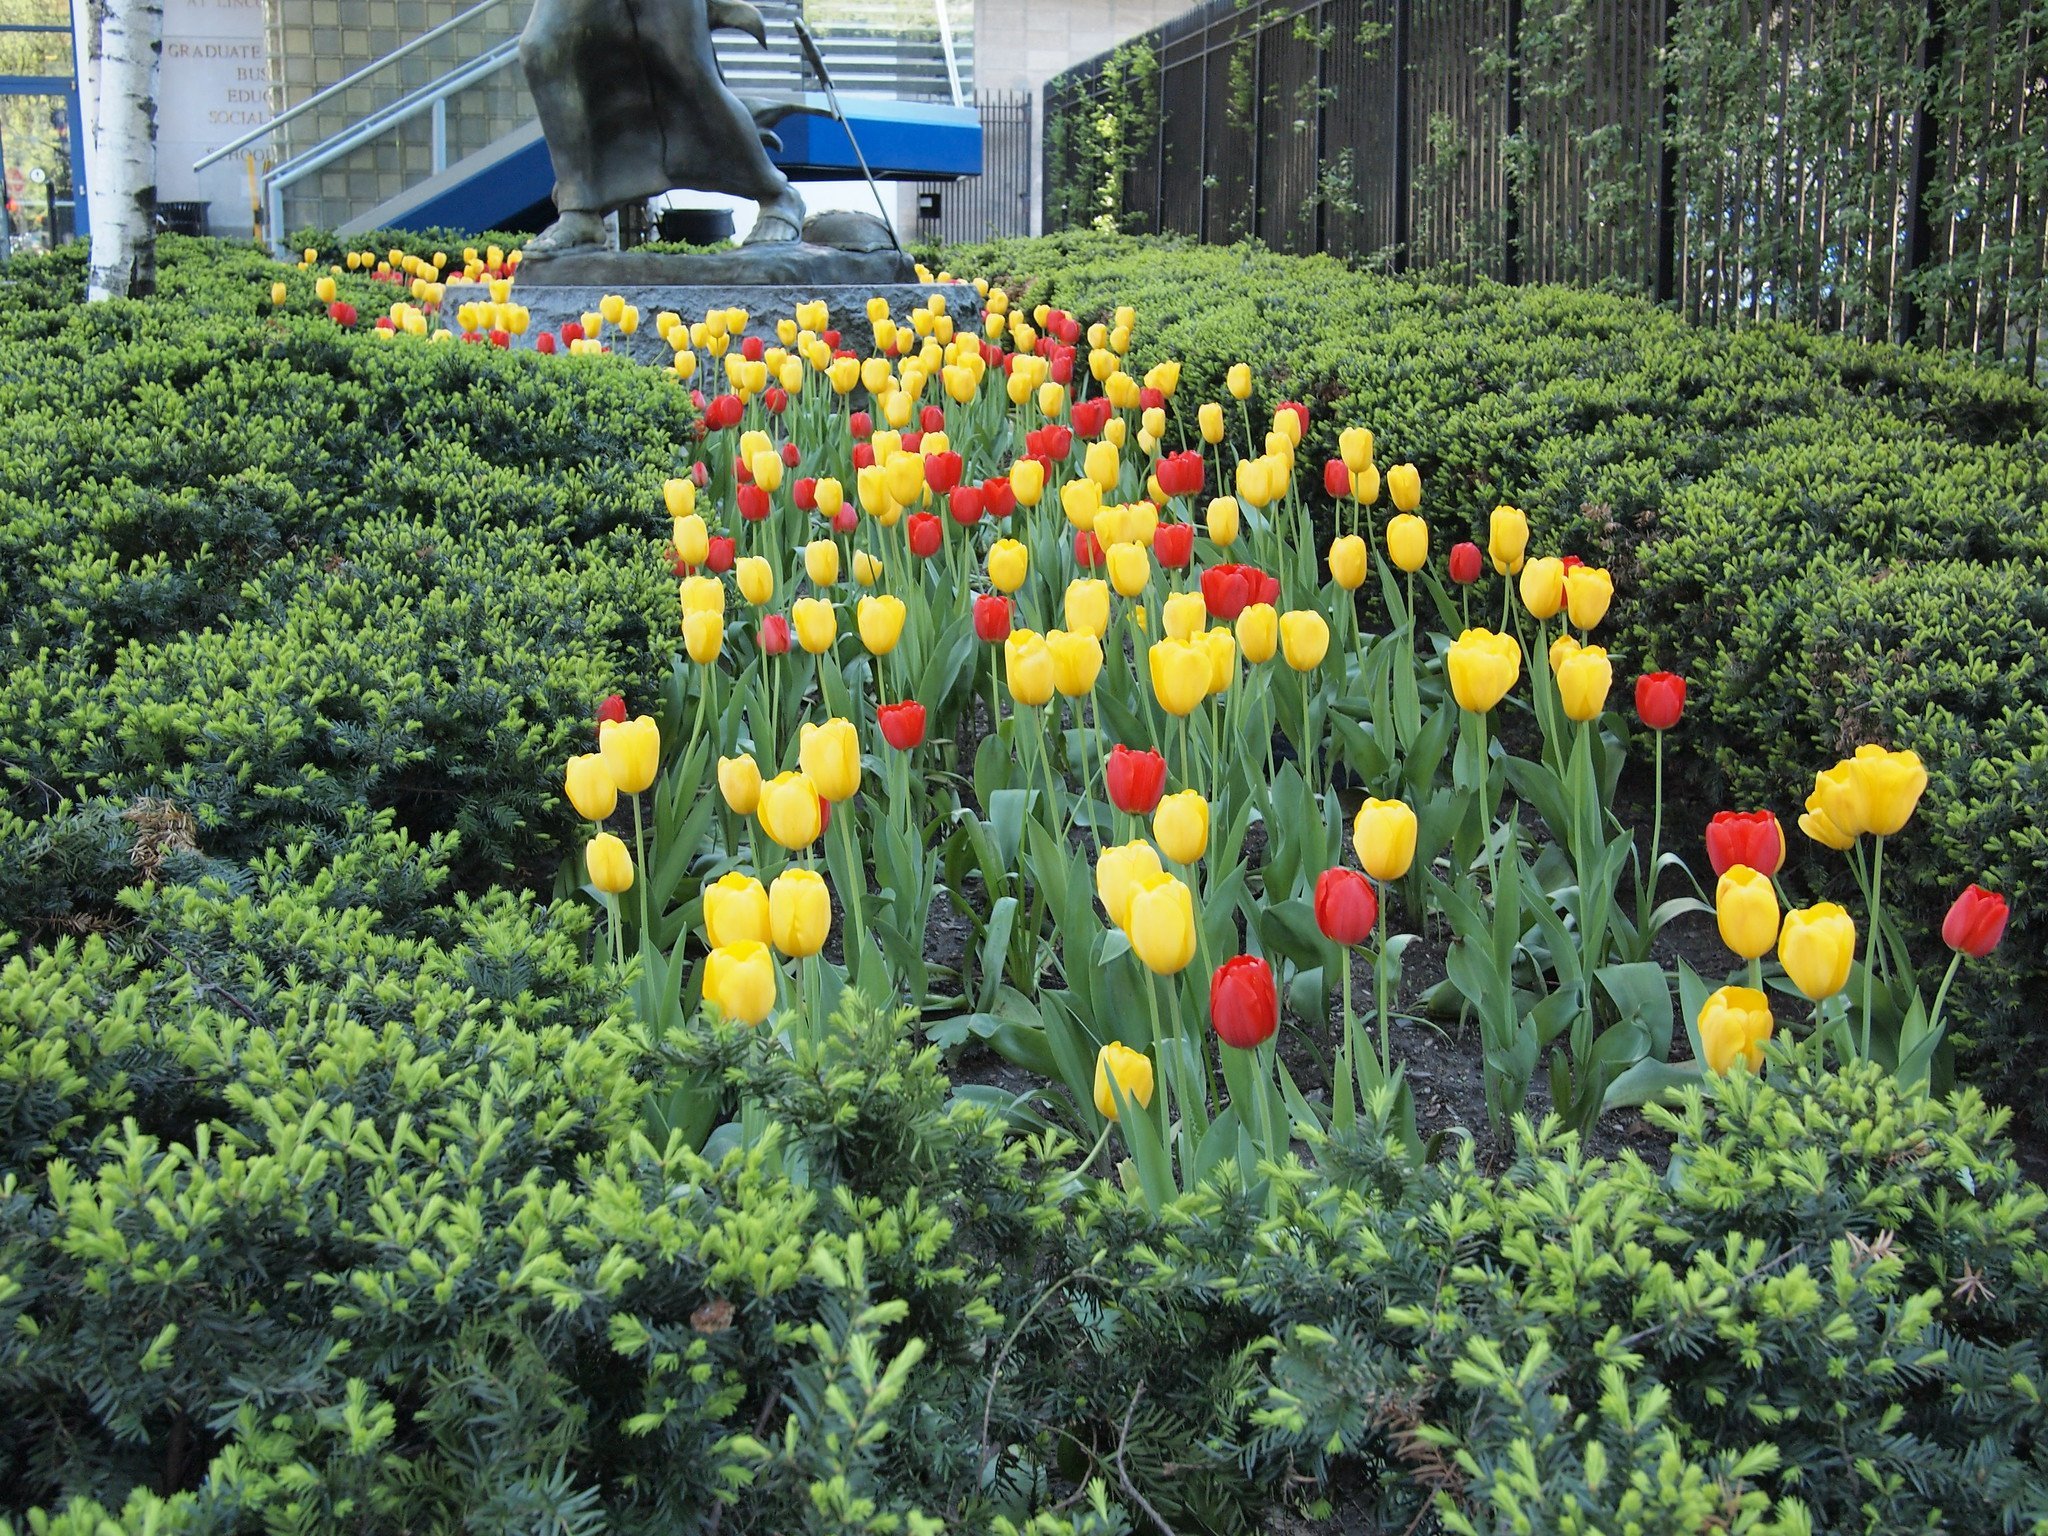 Tulips planted in a line between evergreens